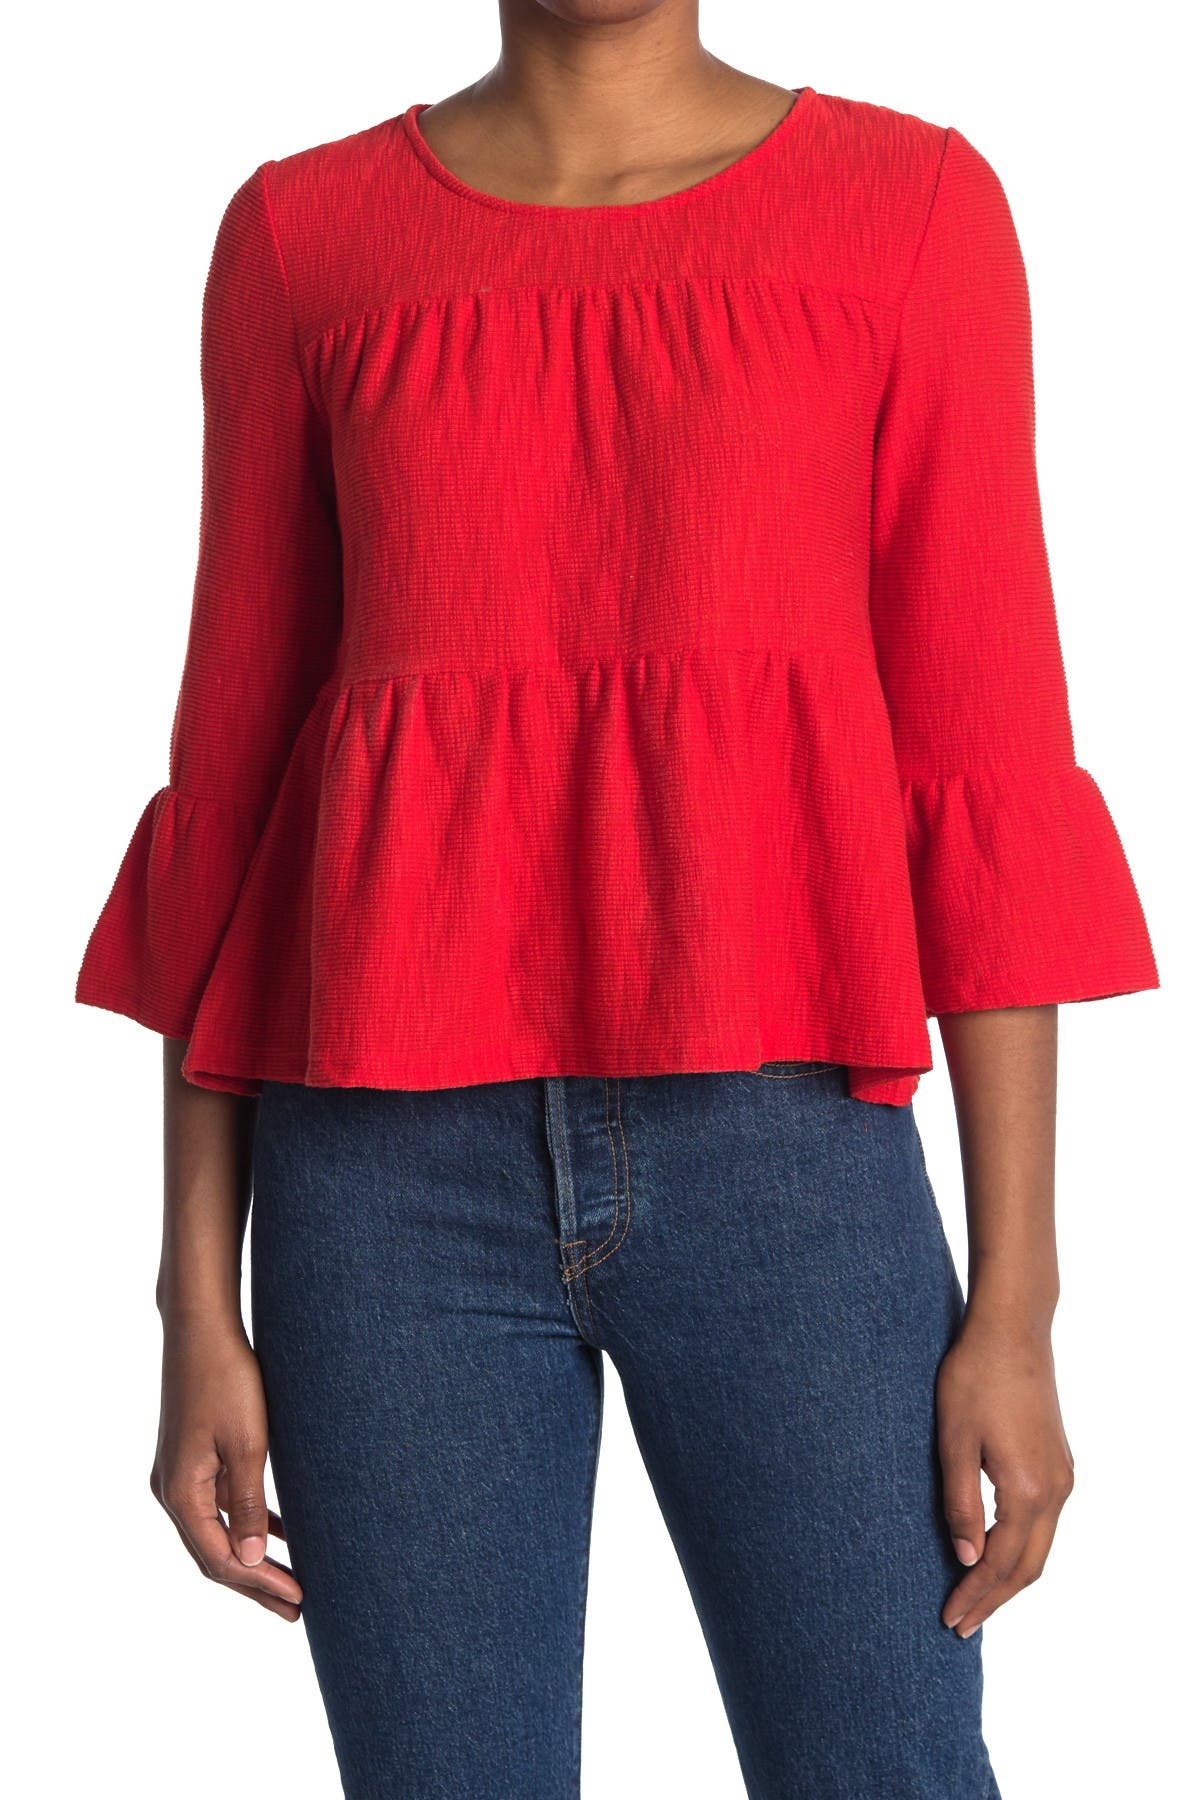 Melloday Tiered Textured Back Button Back Knot T-shirt In Dark Red8